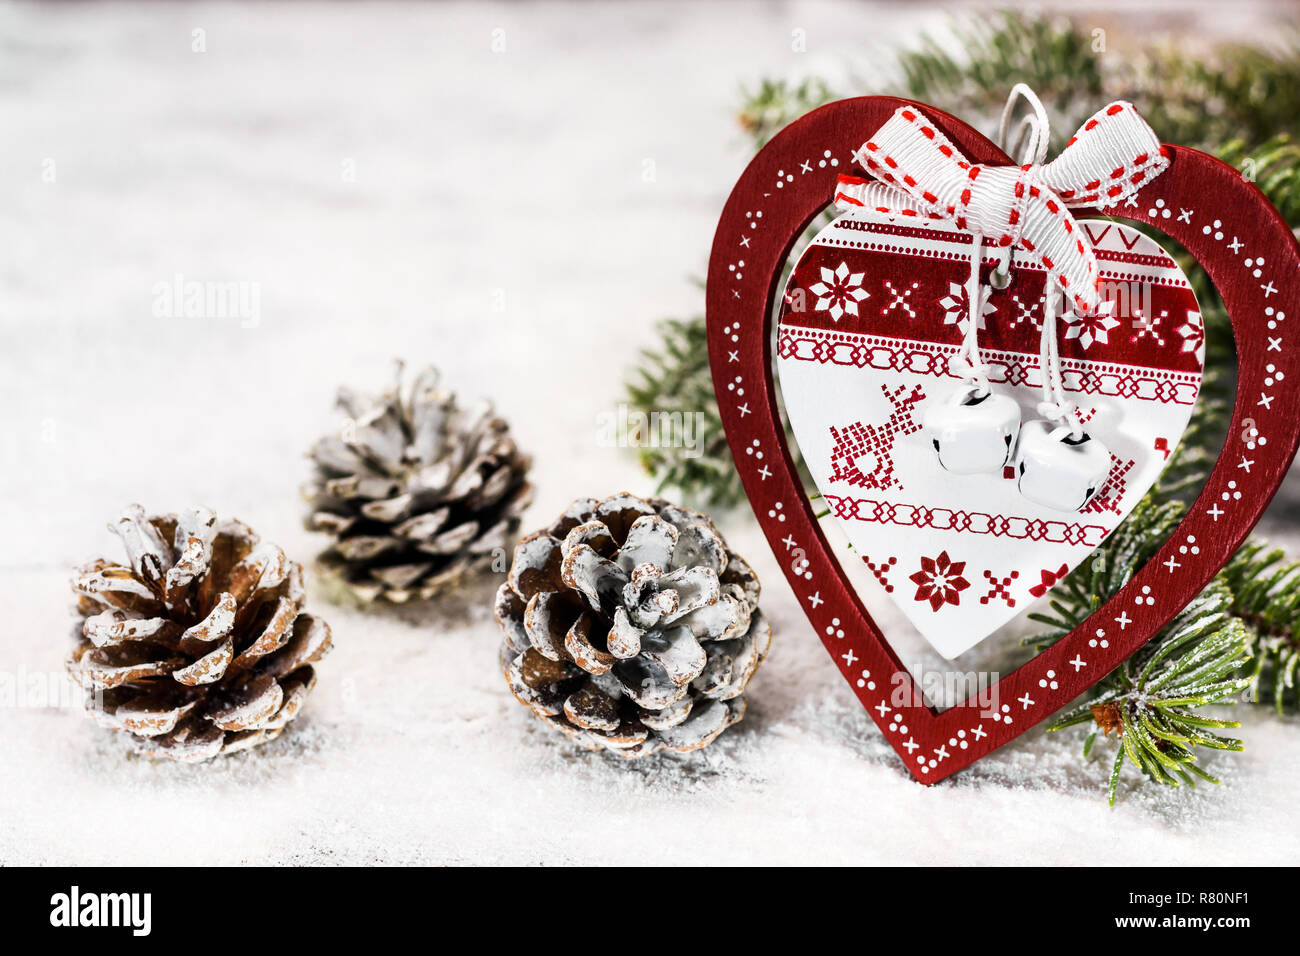 Ornamented wooden heart with Christmas motifs leaning against a fir branch next to a pine cones on the snow. Stock Photo